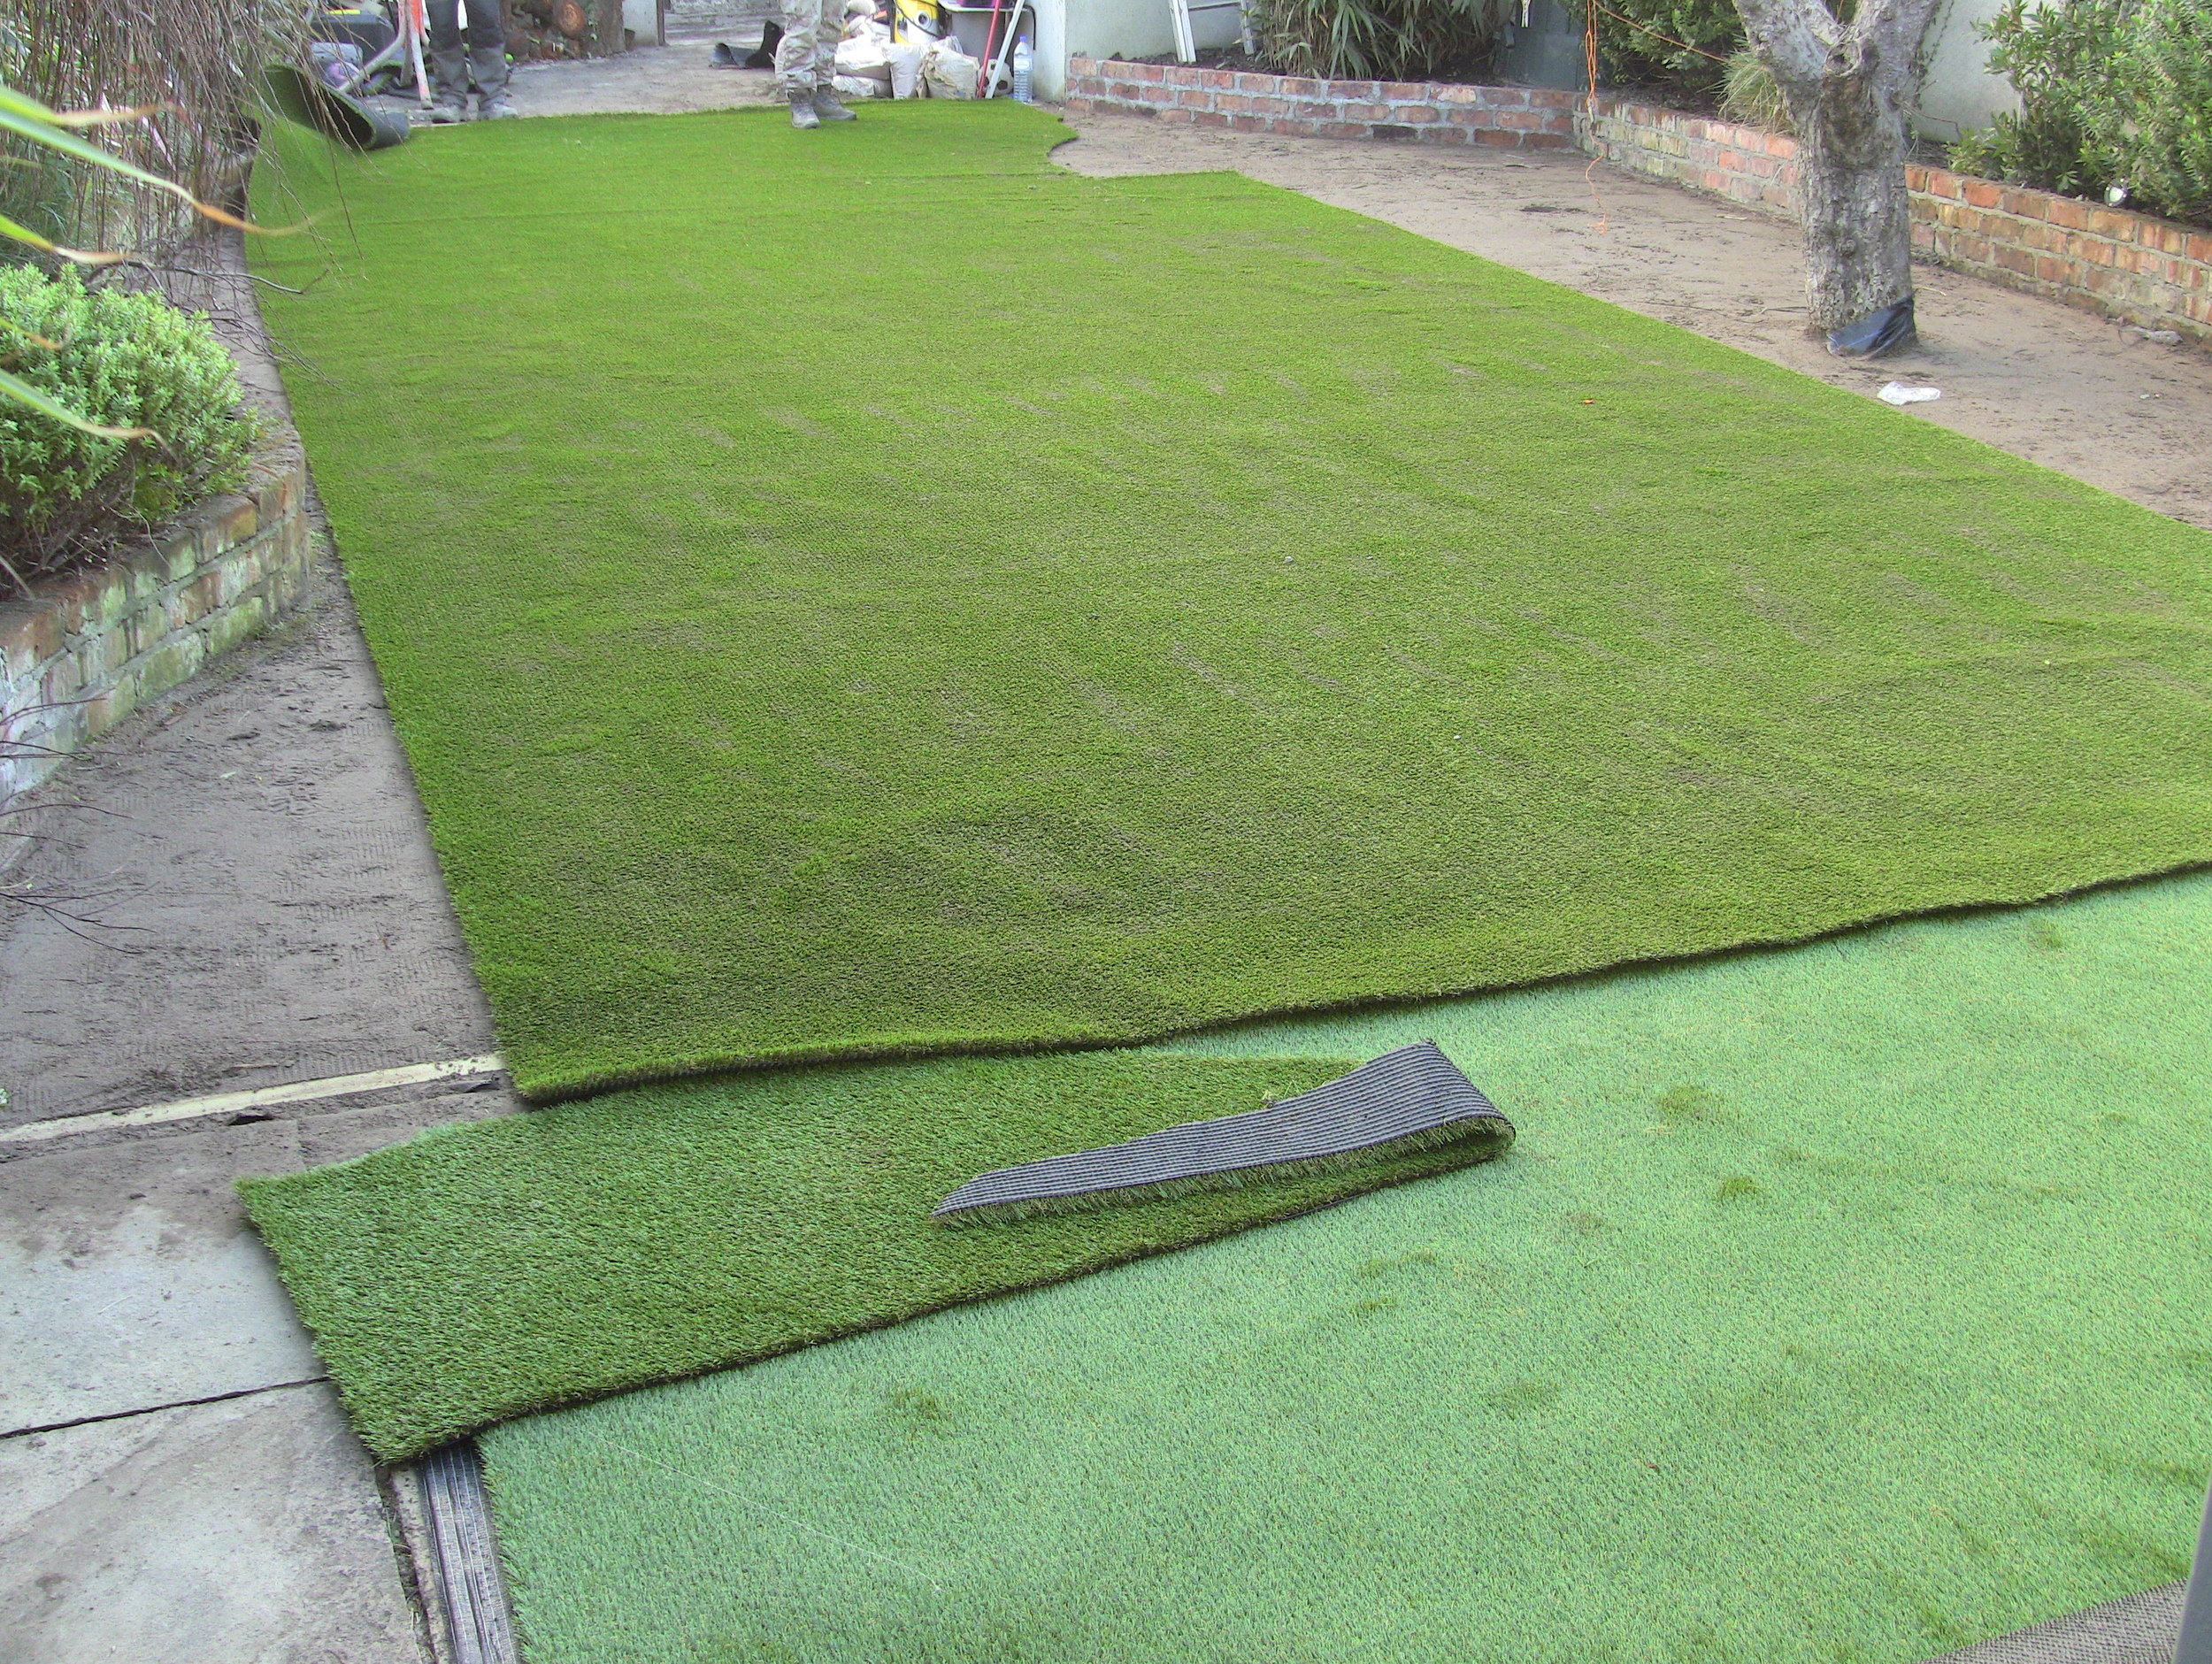 new artificial lawn being fitted